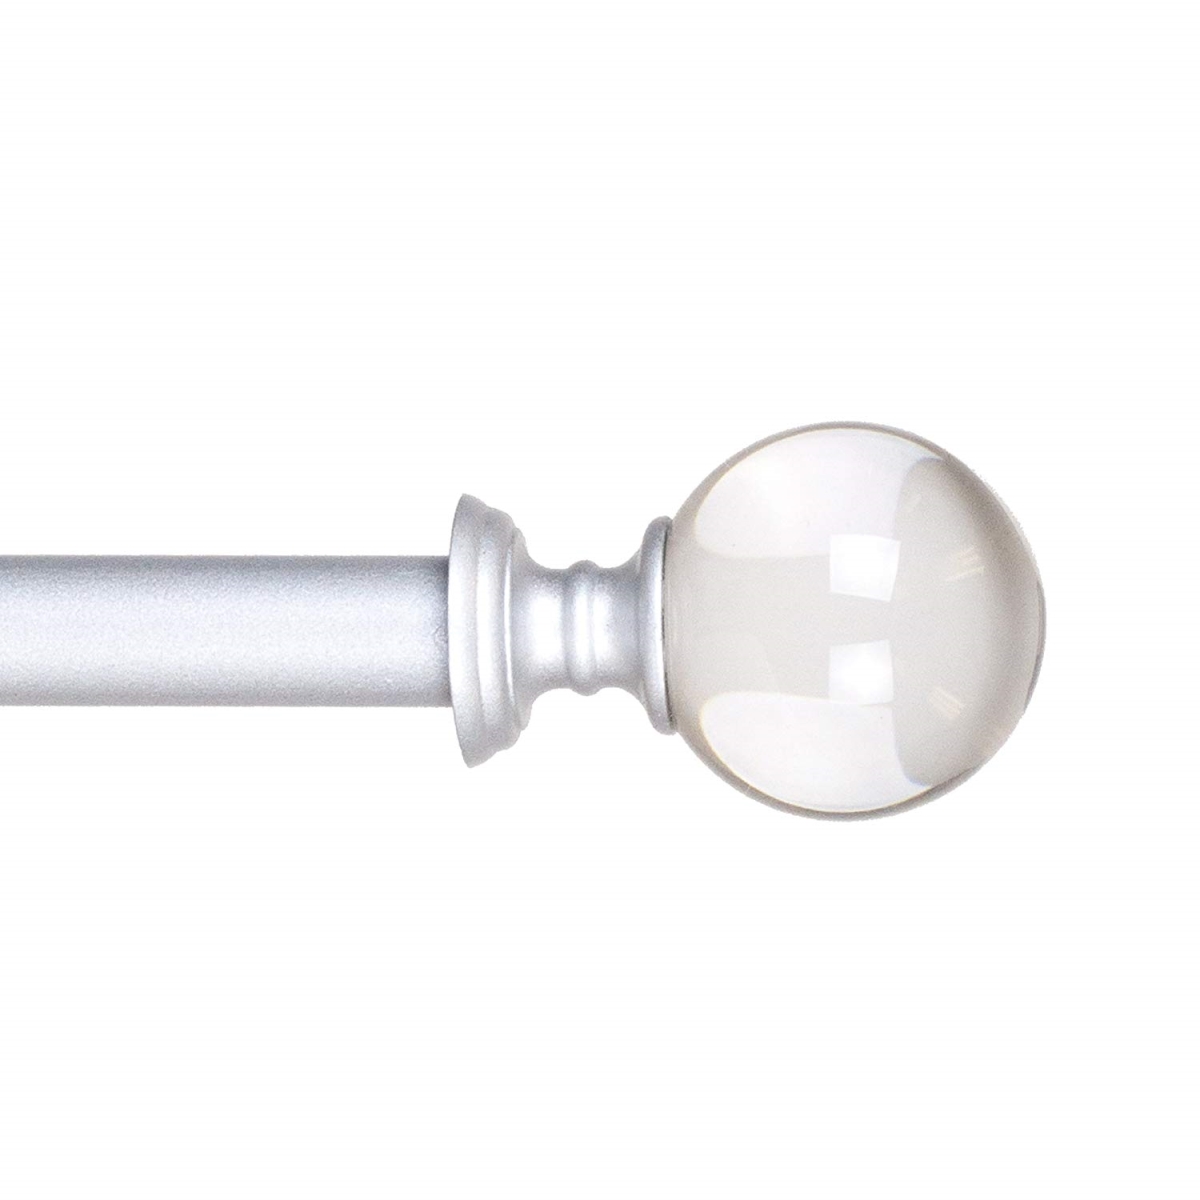 63a-23385 Crystal Ball Curtain Rod, Rubbed Silver - 0.75 In.